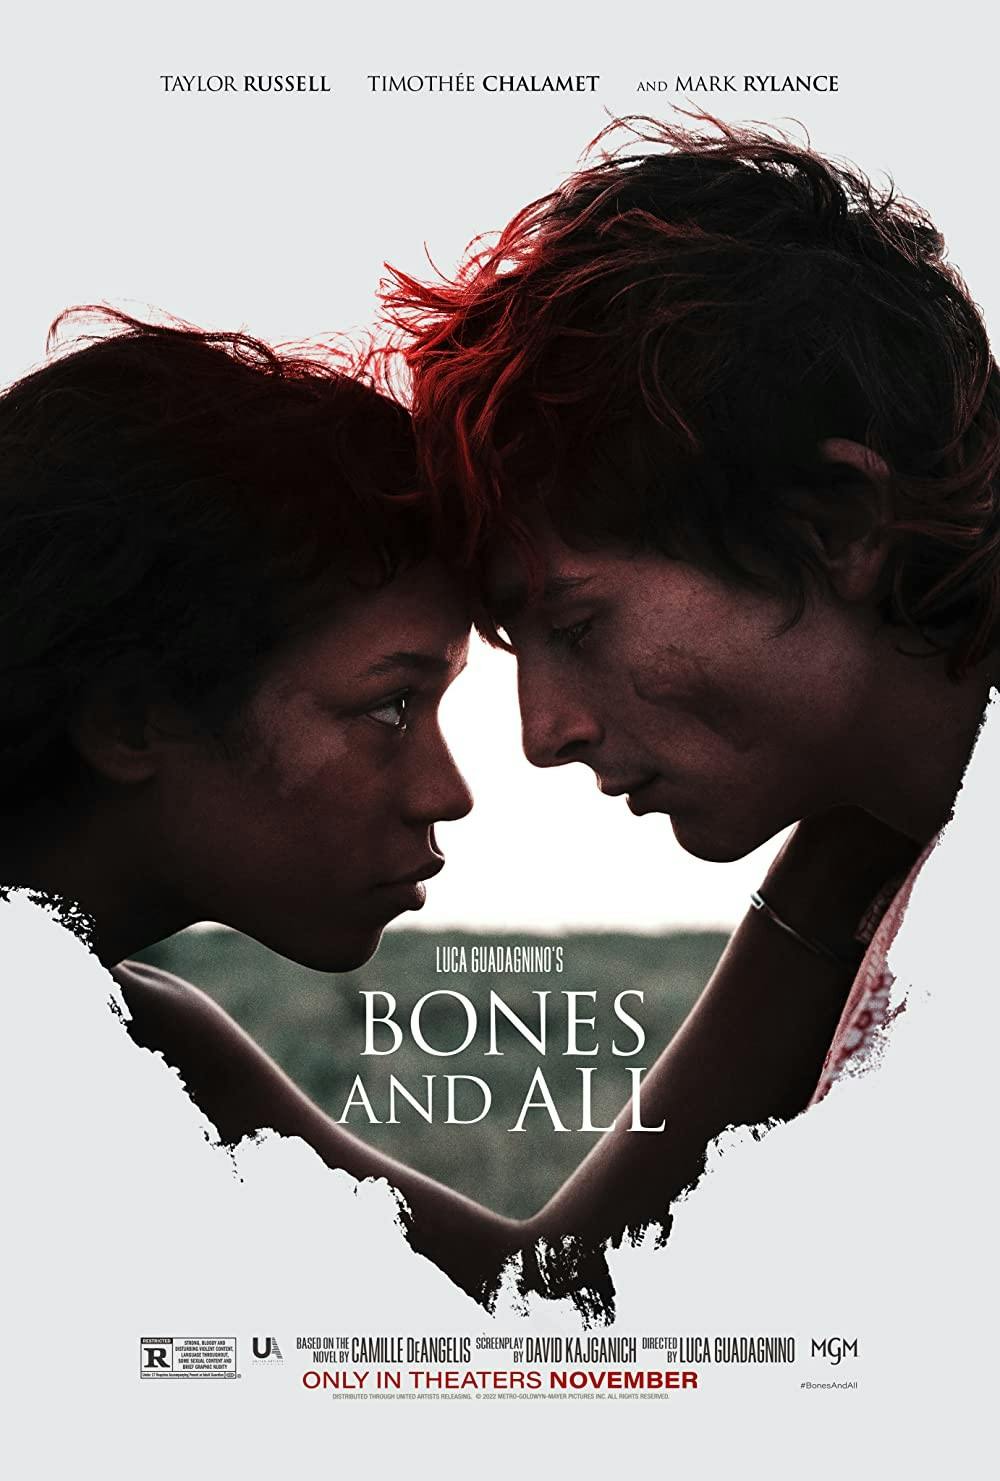 Review: ‘Bones and All’ is a ghastly coming-of-age story